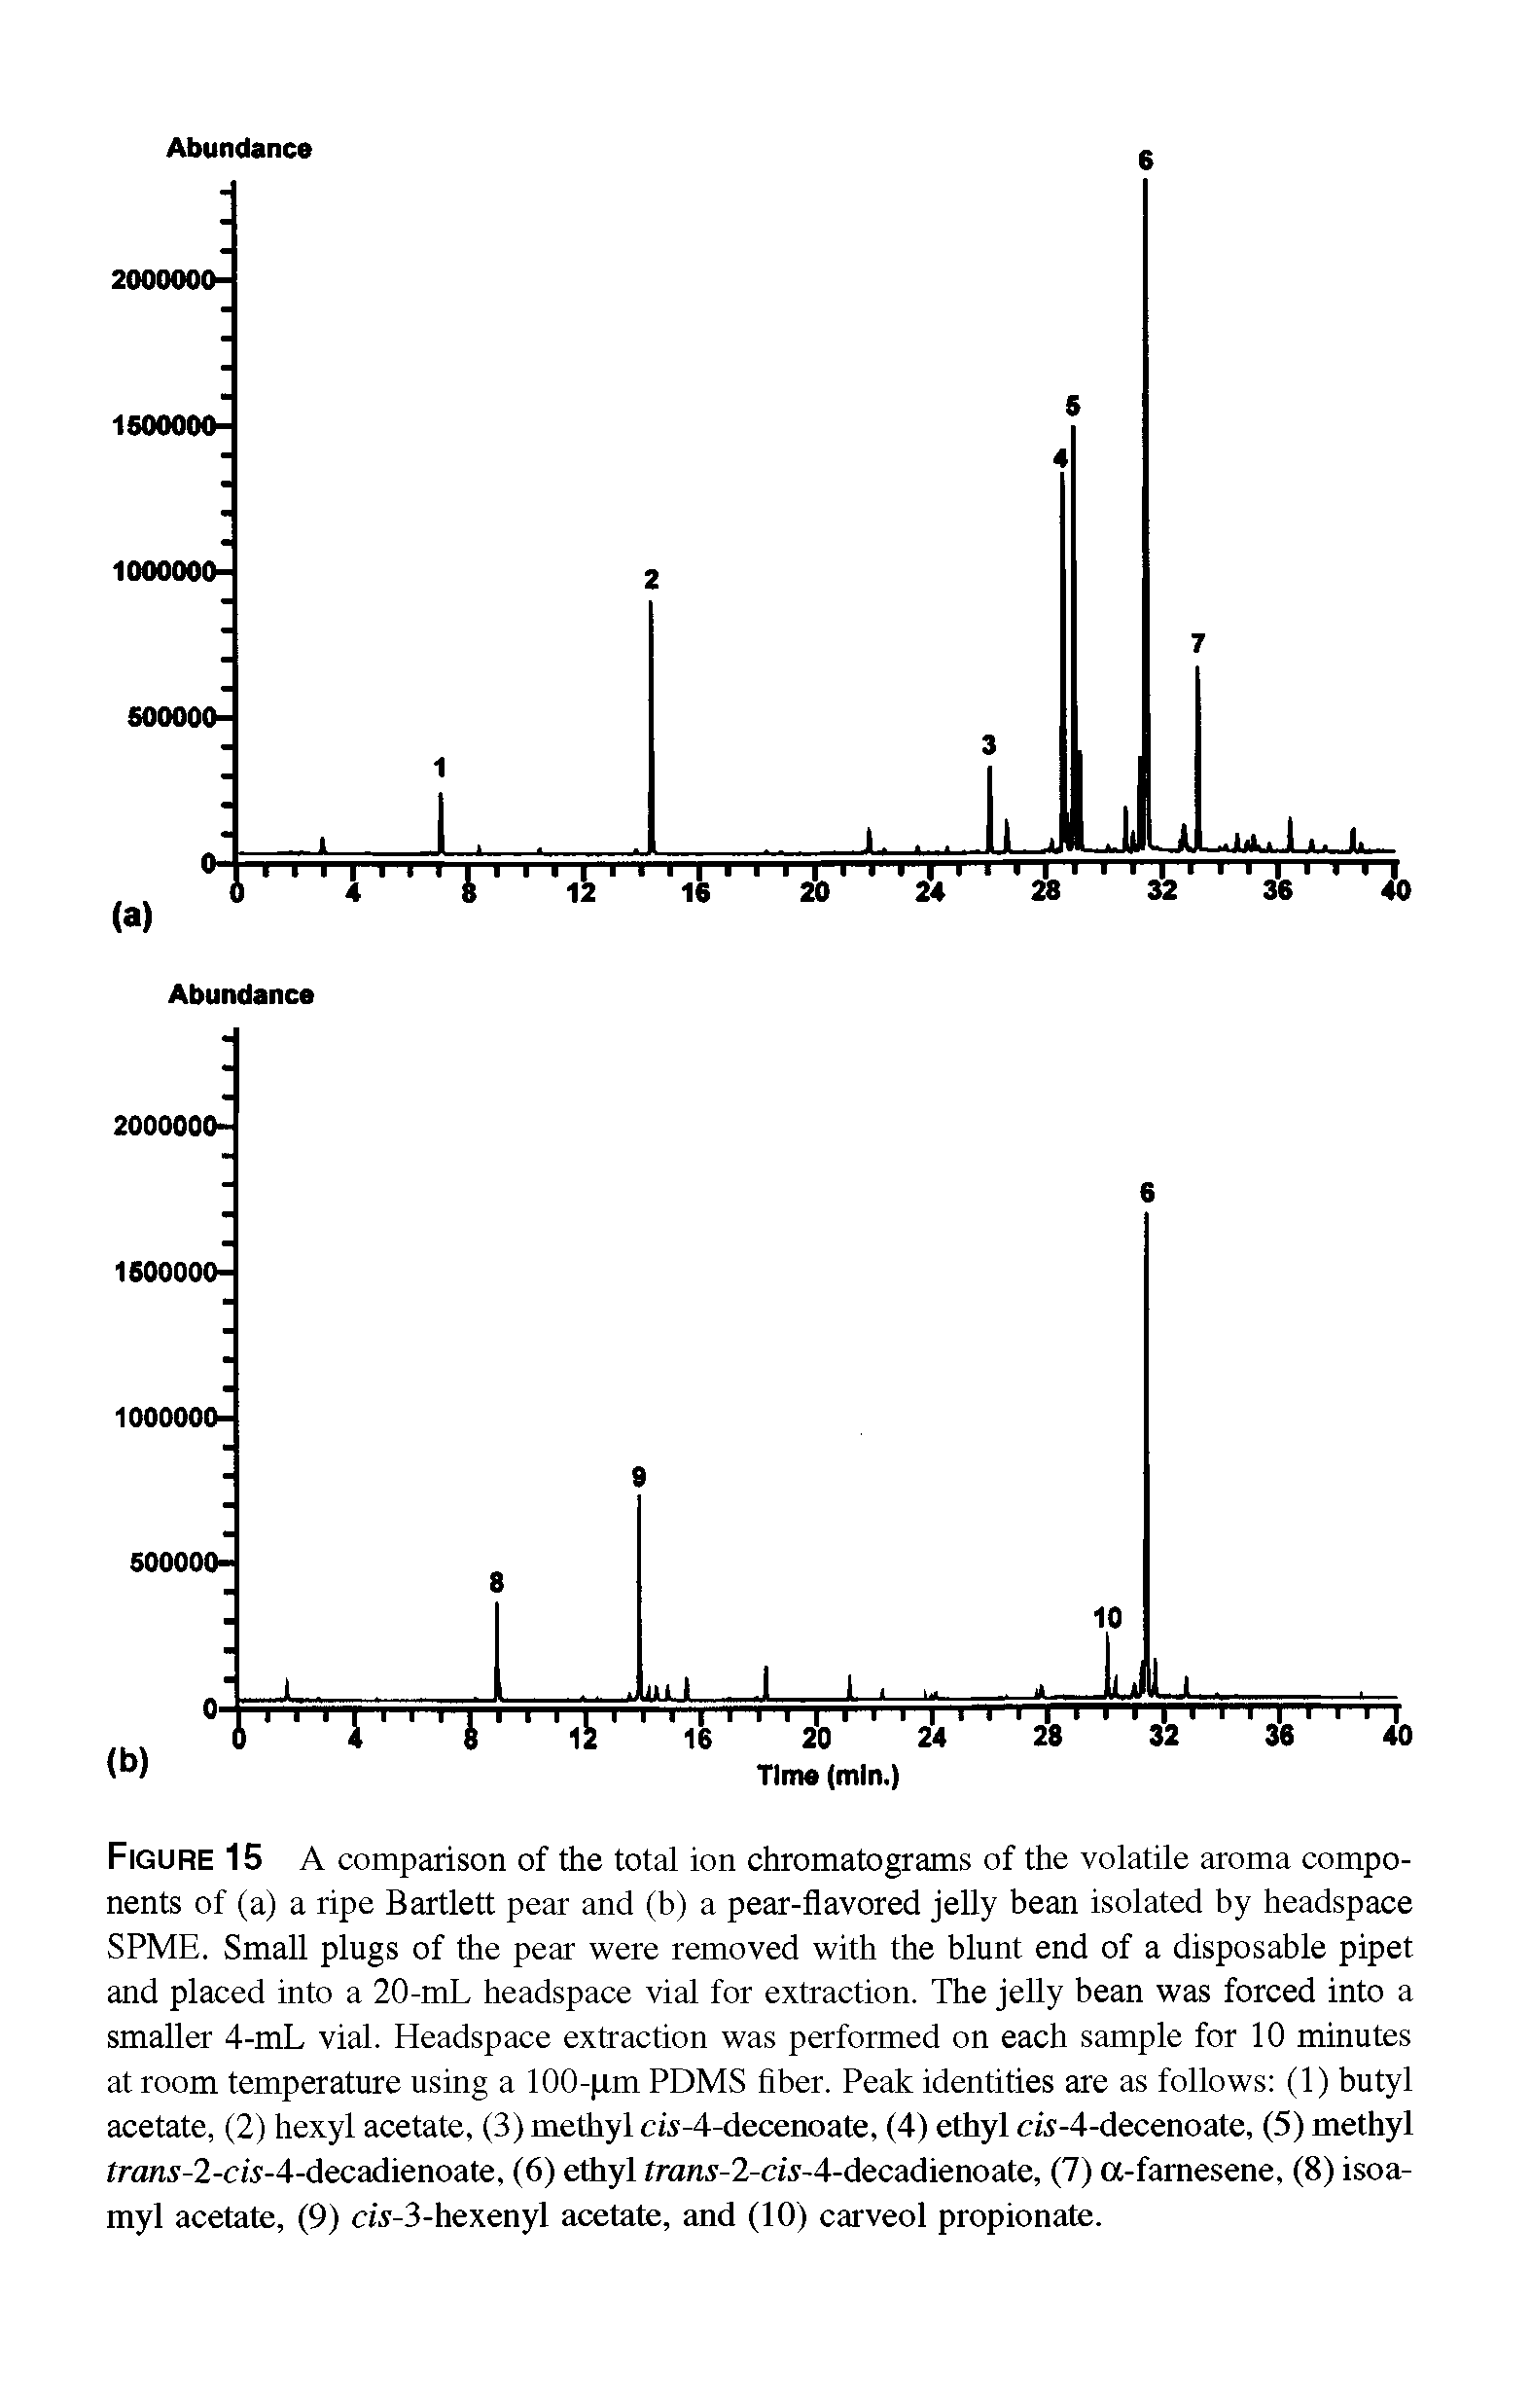 Figure 15 A comparison of the total ion chromatograms of the volatile aroma components of (a) a ripe Bartlett pear and (b) a pear-flavored jelly bean isolated by headspace SPME. Small plugs of the pear were removed with the blunt end of a disposable pipet and placed into a 20-mL headspace vial for extraction. The jelly bean was forced into a smaller 4-mL vial. Headspace extraction was performed on each sample for 10 minutes at room temperature using a 100-(xm PDMS fiber. Peak identities are as follows (1) butyl acetate, (2) hexyl acetate, (3) methyl cis-4-decenoate, (4) ethyl cis-4-decenoate, (5) methyl frawi-2-cw-4-decadienoate, (6) ethyl frani-2-ds-4-decadienoate, (7) a-famesene, (8) isoamyl acetate, (9) ds-3-hexenyl acetate, and (10) carveol propionate.